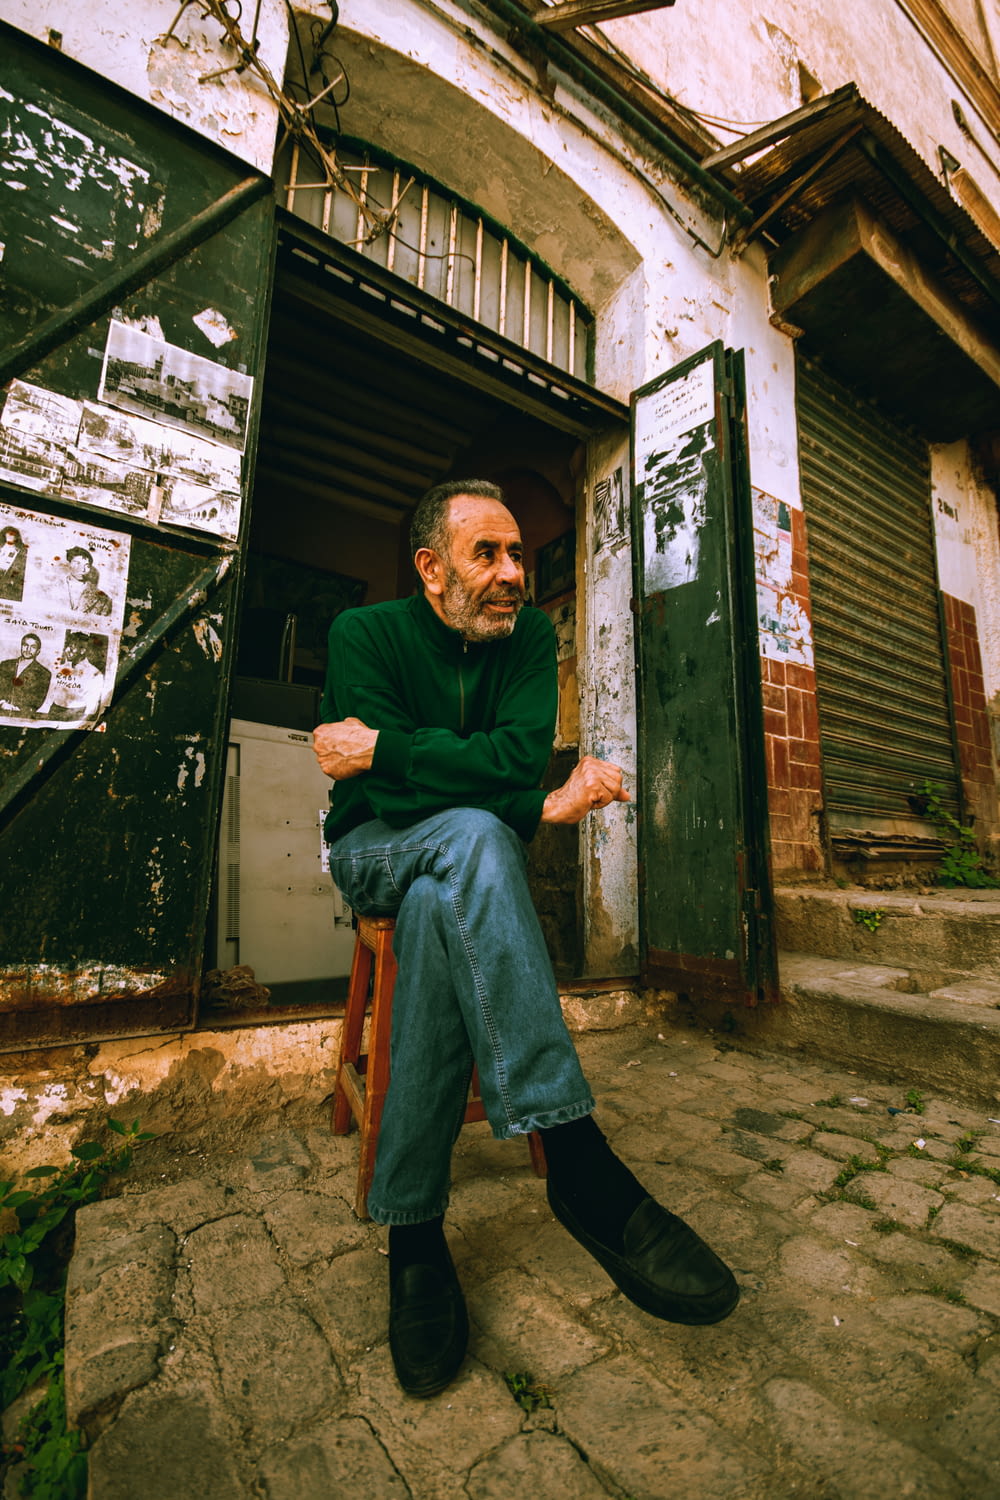 a man sitting on a chair in front of a building